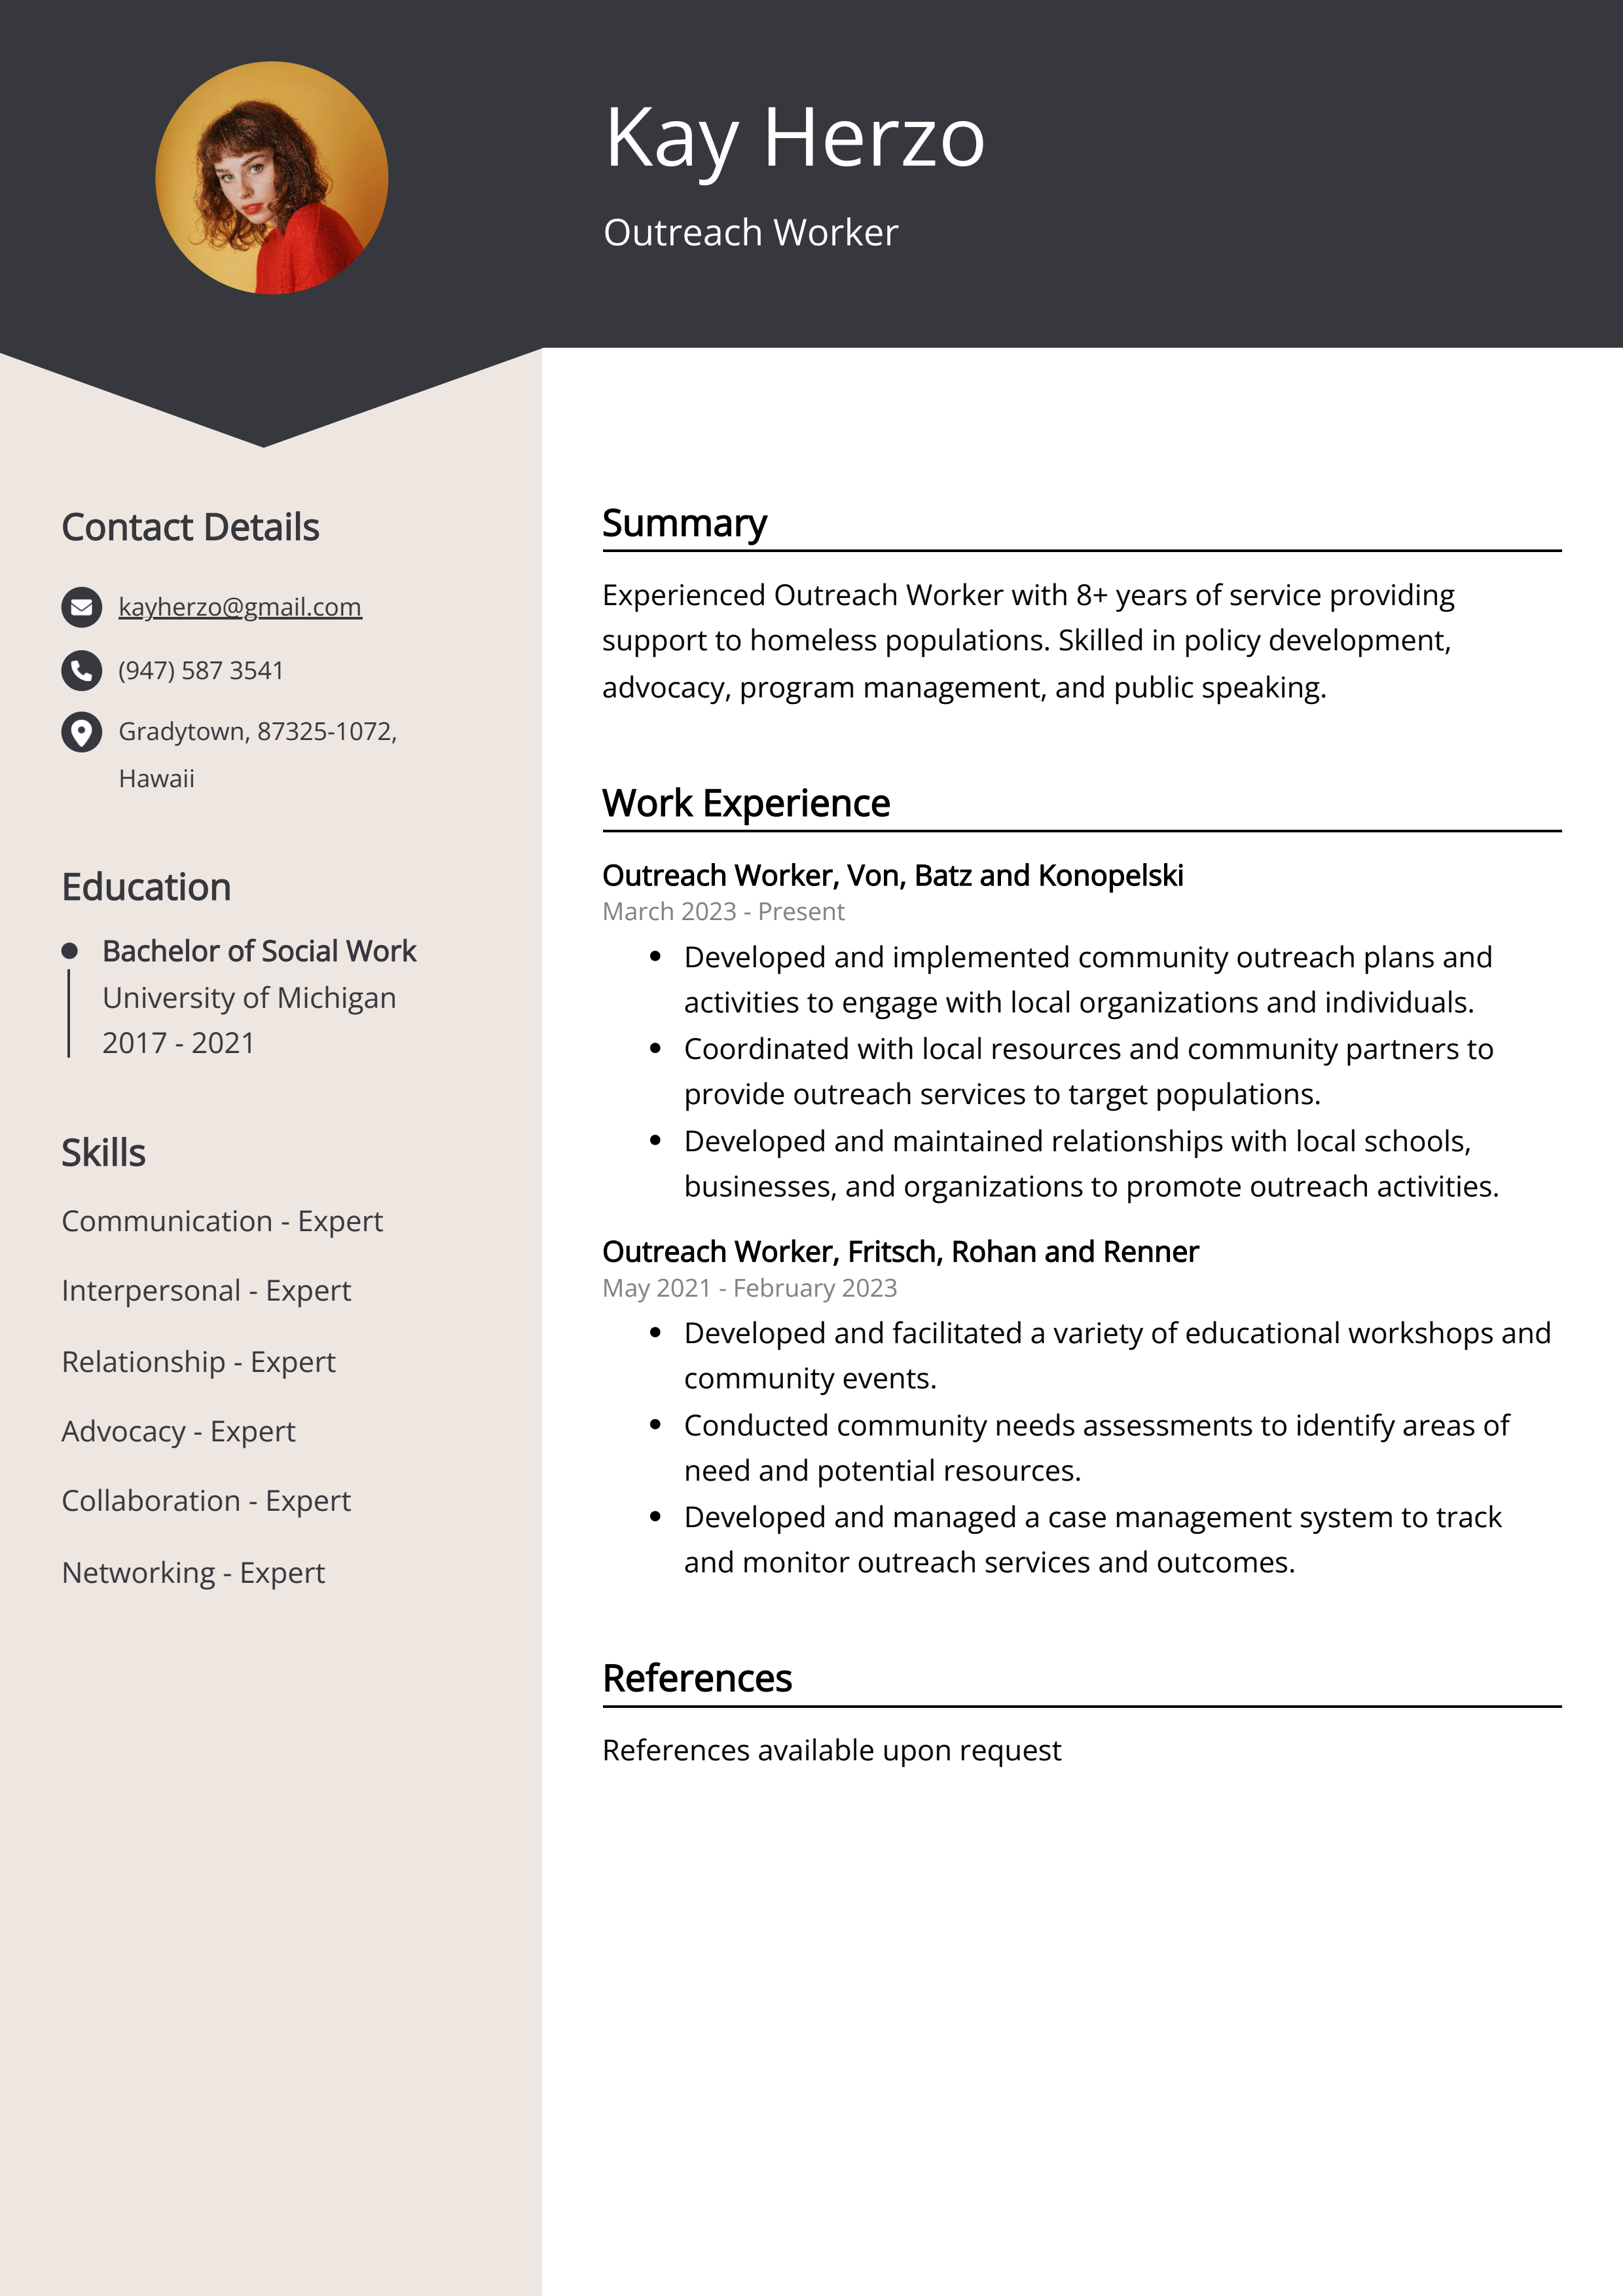 Outreach Worker CV Example